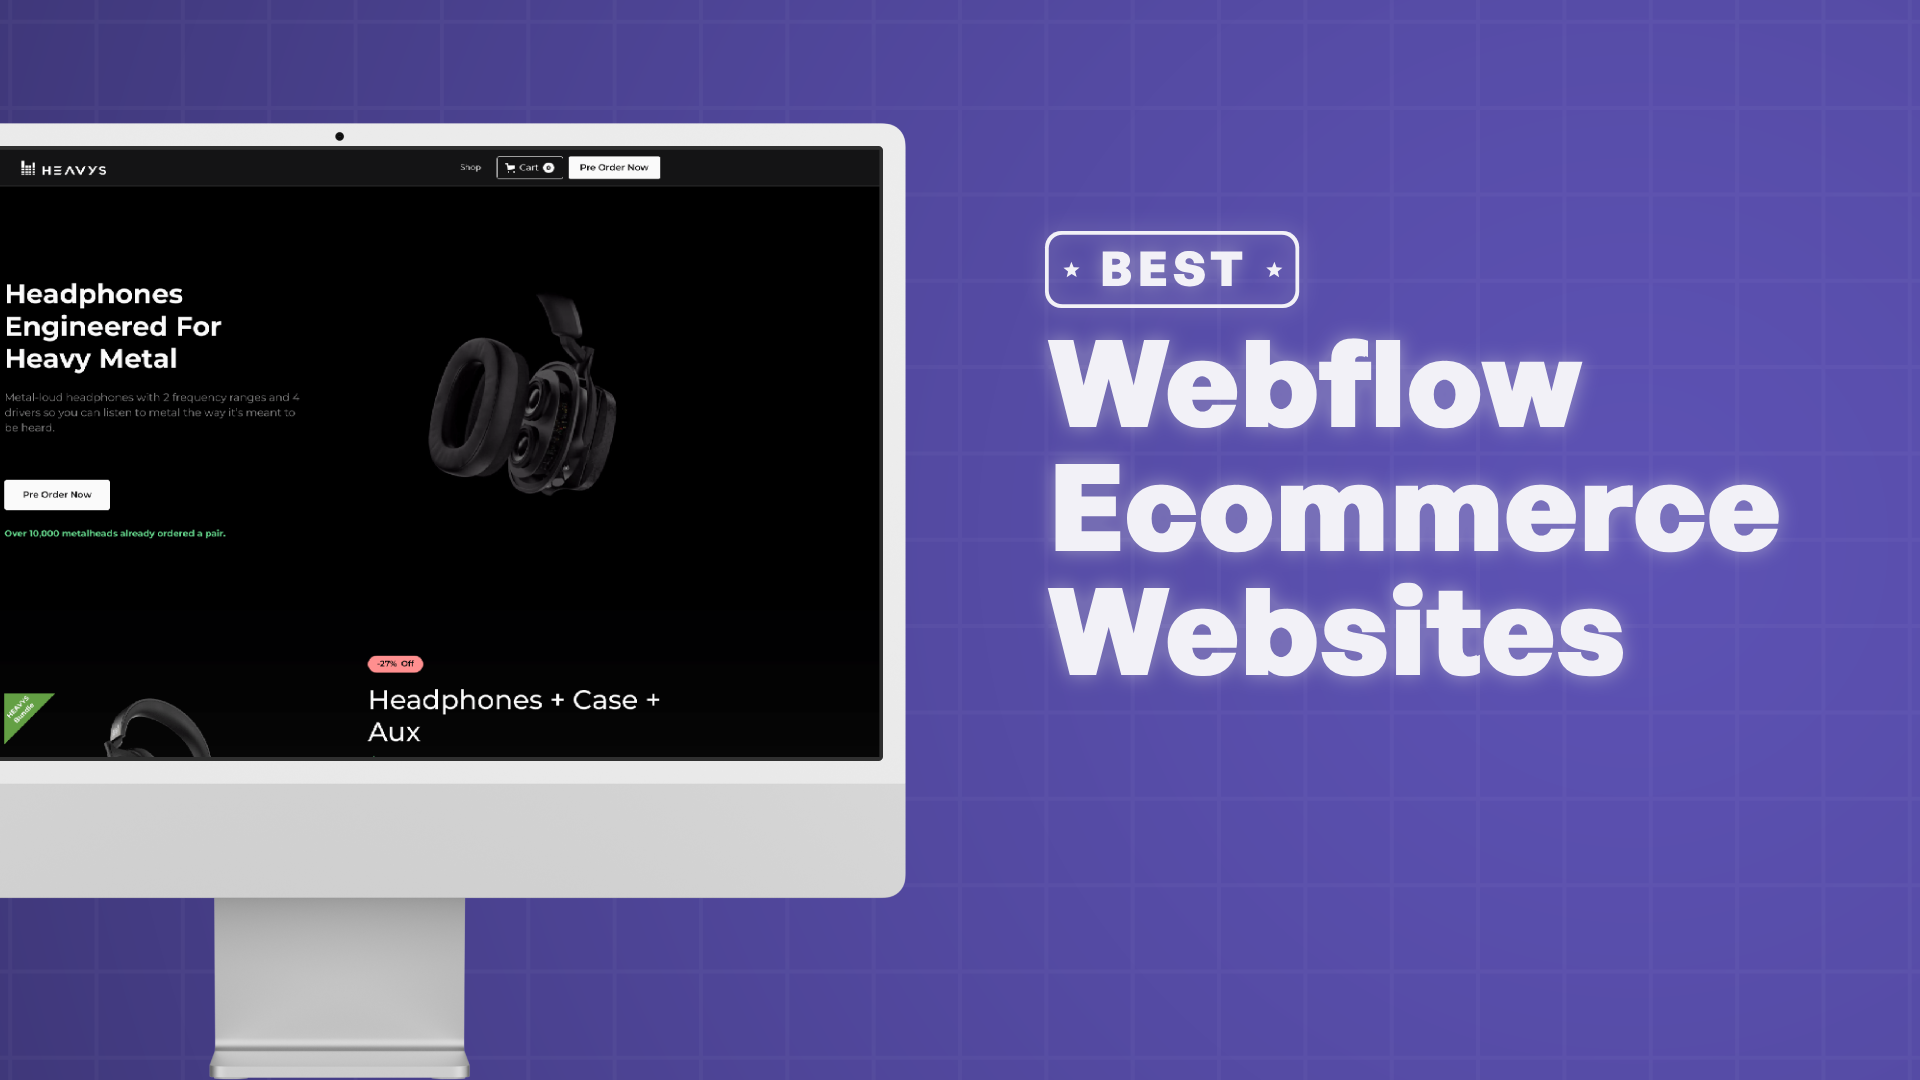 "Best Ecommerce Websites on Webflow" with screenshots of the ecommerce websites on Webflow